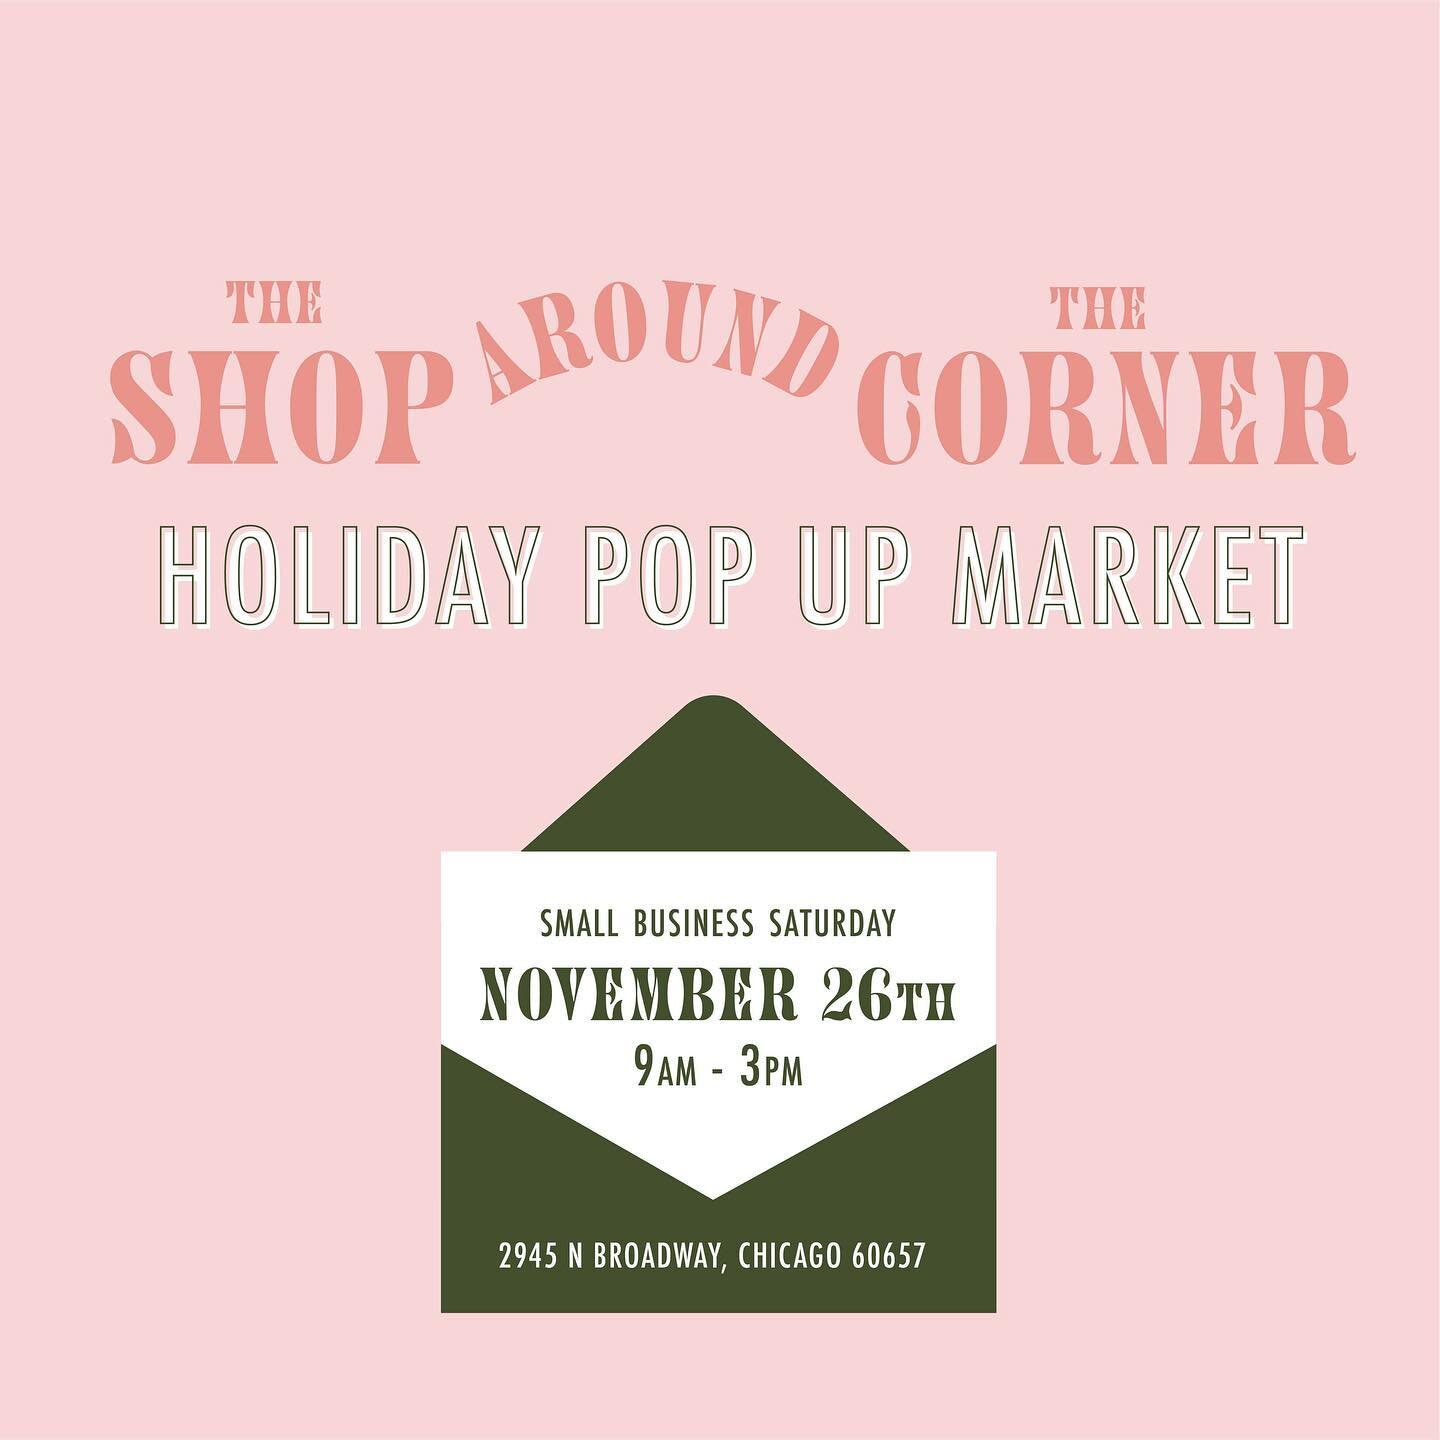 💕 You&rsquo;ve Got Mail stans, this one&rsquo;s for you 💕
Join us for our first ever #ShopAroundtheCorner Holiday Market! We&rsquo;ll be joined by seven incredible local artisans and makers for this Kathleen Kelley-approved pop up shop to celebrate